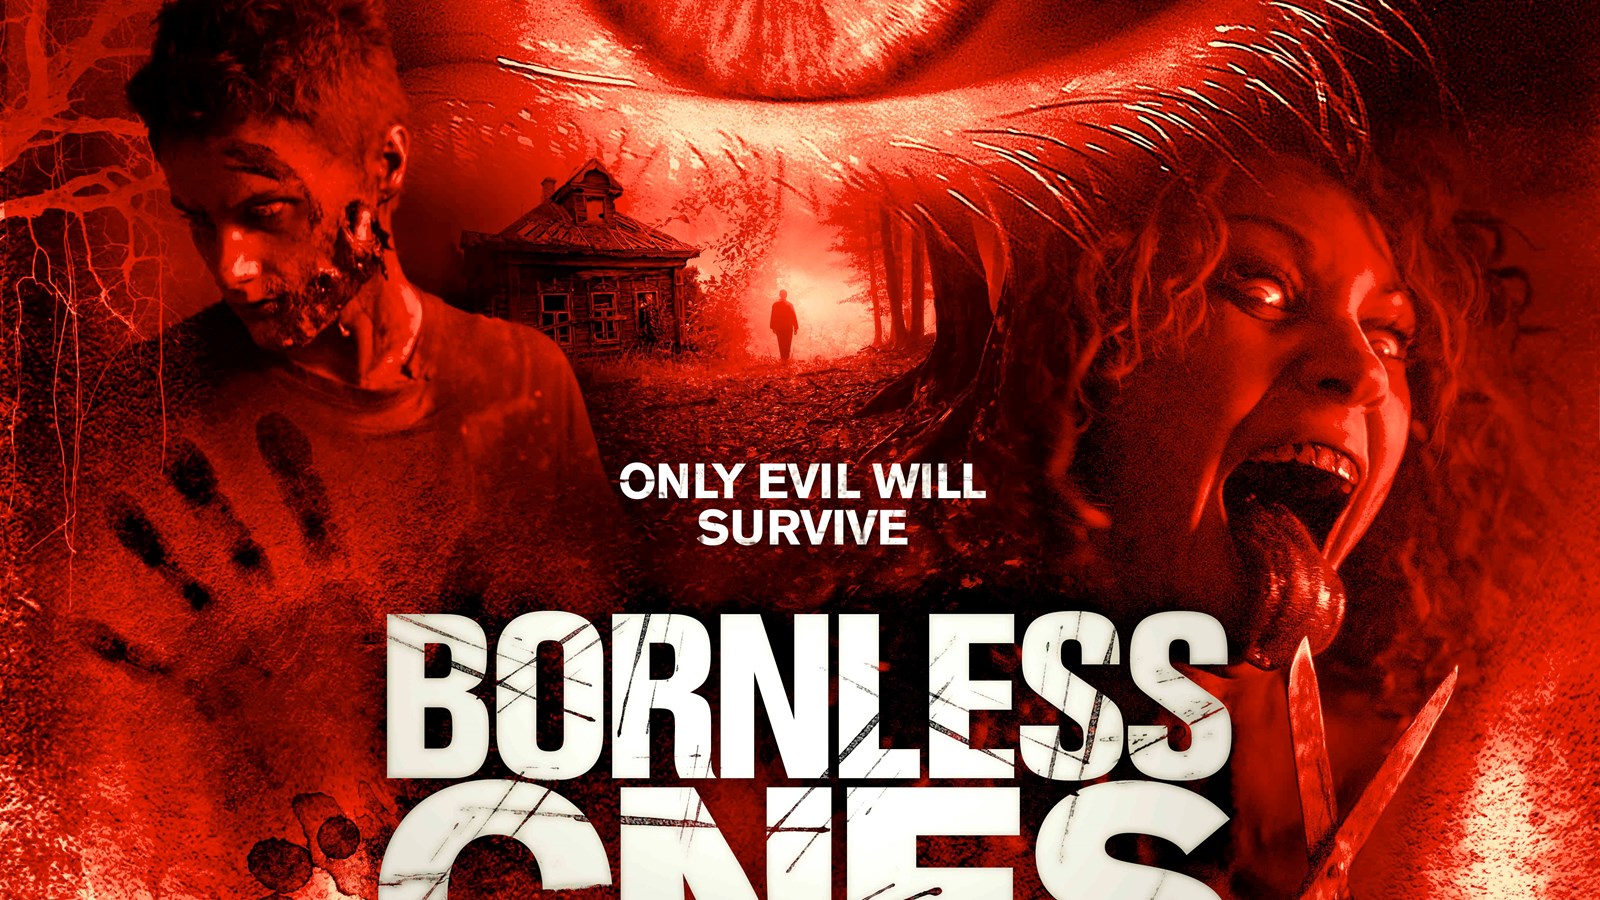 Bornless%20Ones%20poster.jpg?v=15&width=1600&height=900&scale=both&mode=crop